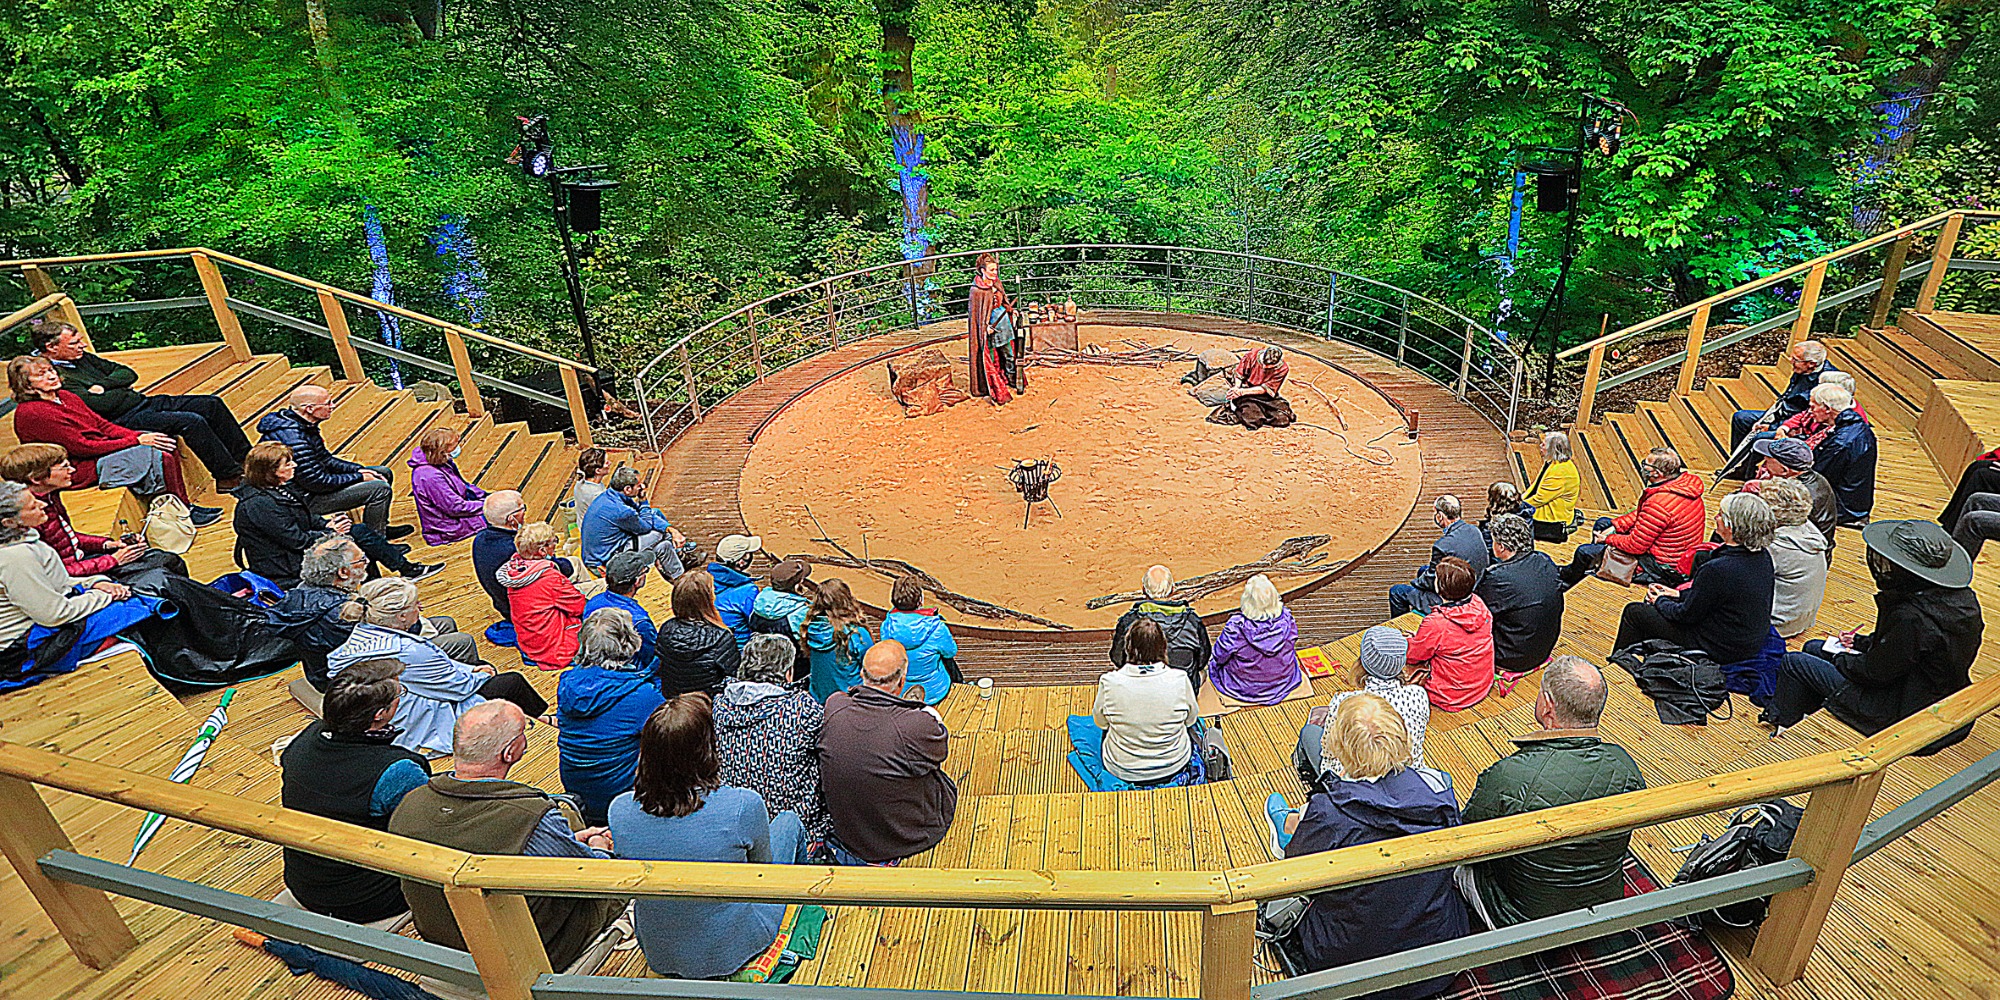 Image of the outdoor amphitheatre, wooden seating is located in a semi circle around half of the amphitheatre and on the staging area is an actor performing, a metal railing circles the outer rim and behind is a drop that leads in a garden with many green trees surrounding the top half of the image